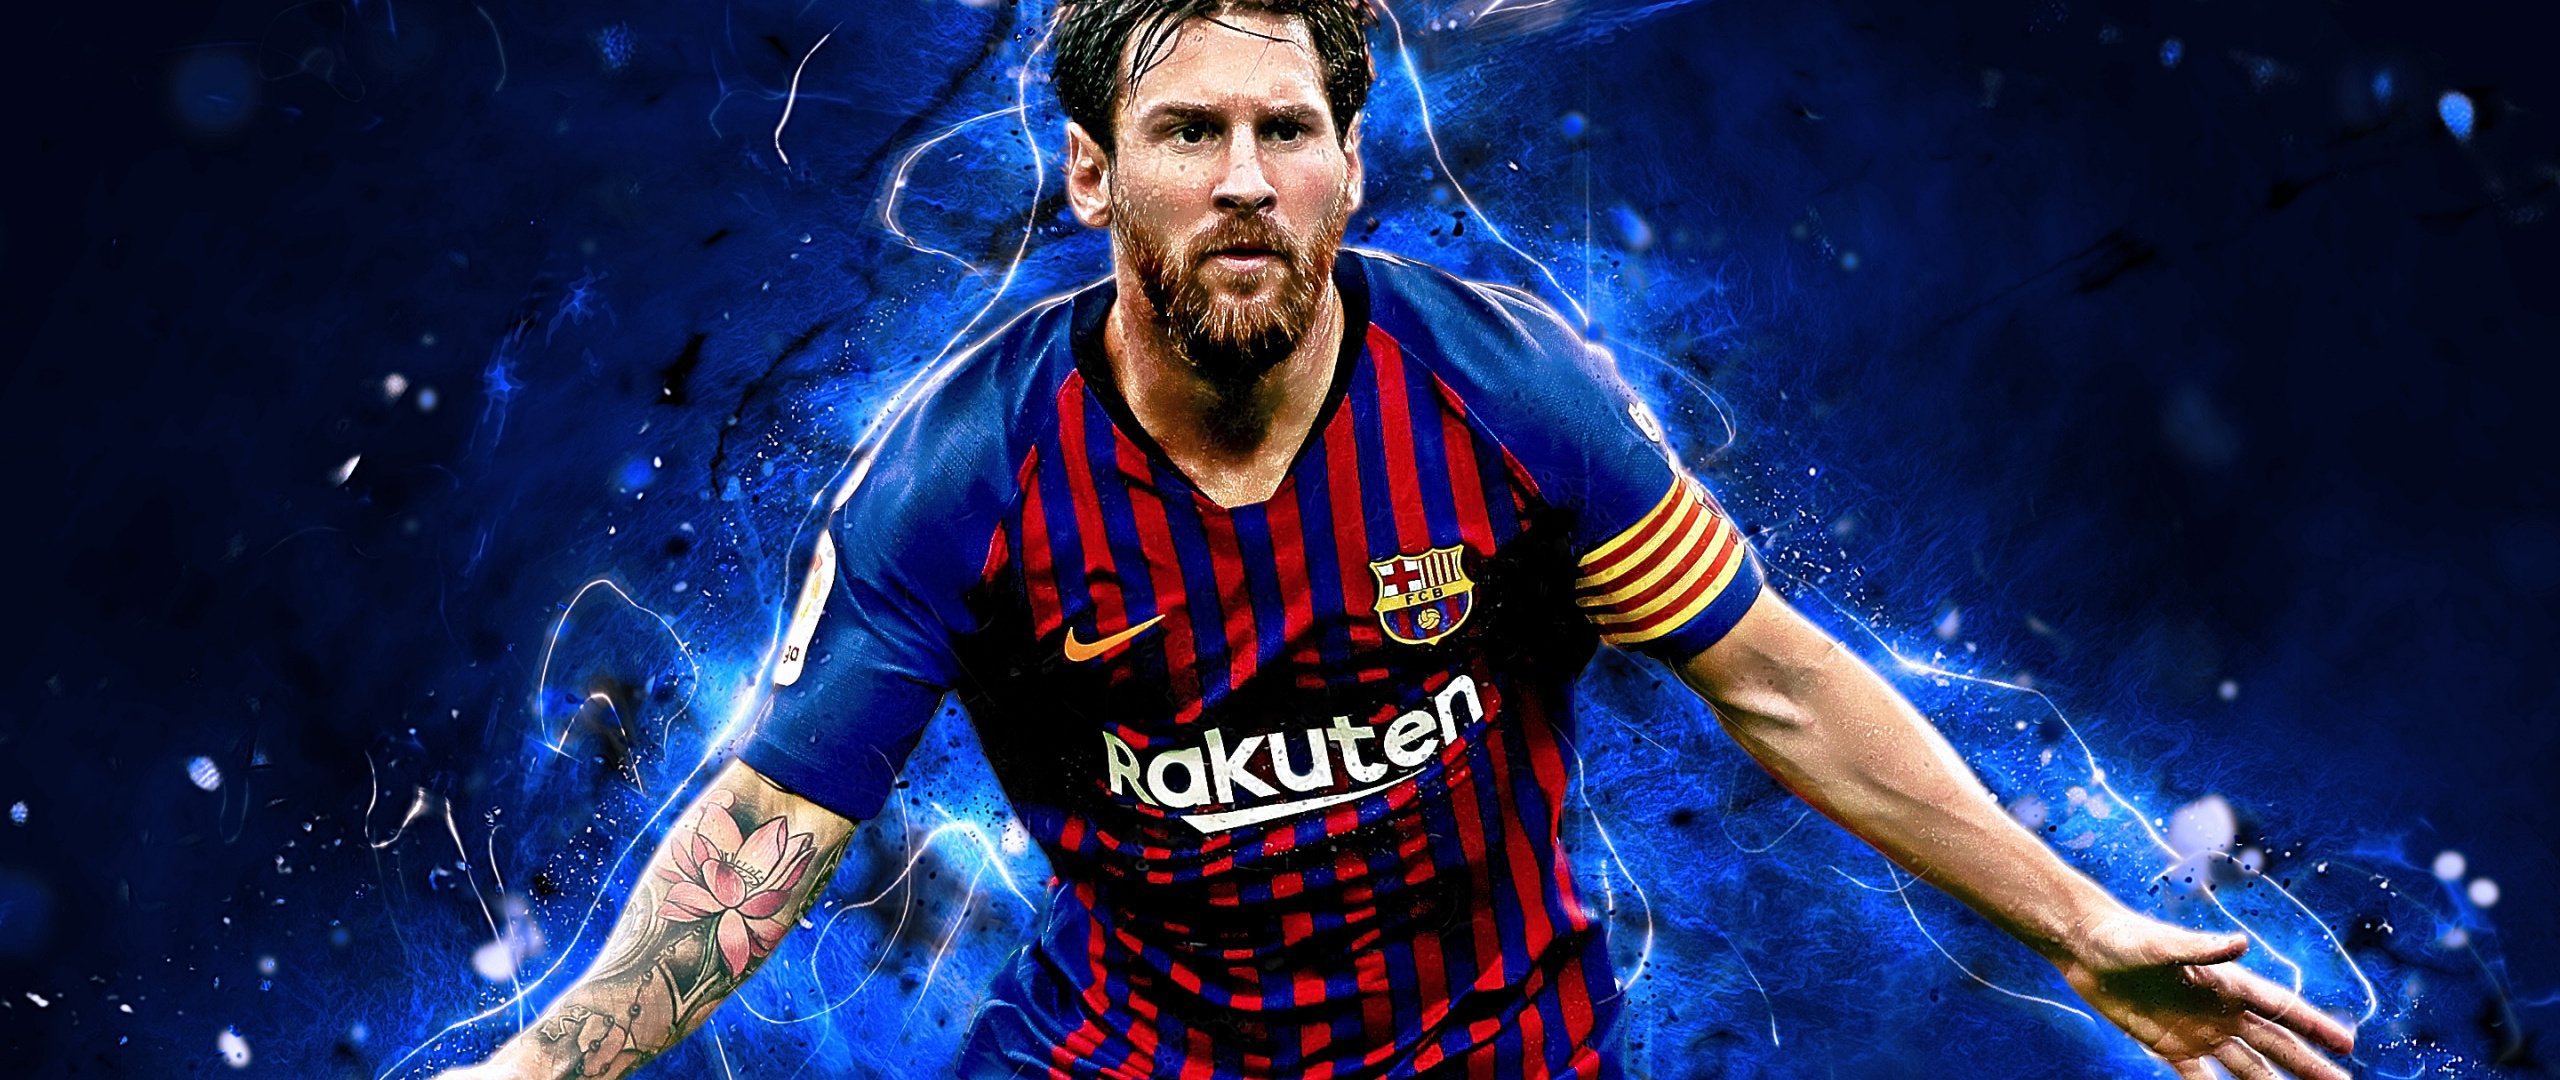 Messi For Pc Wallpapers